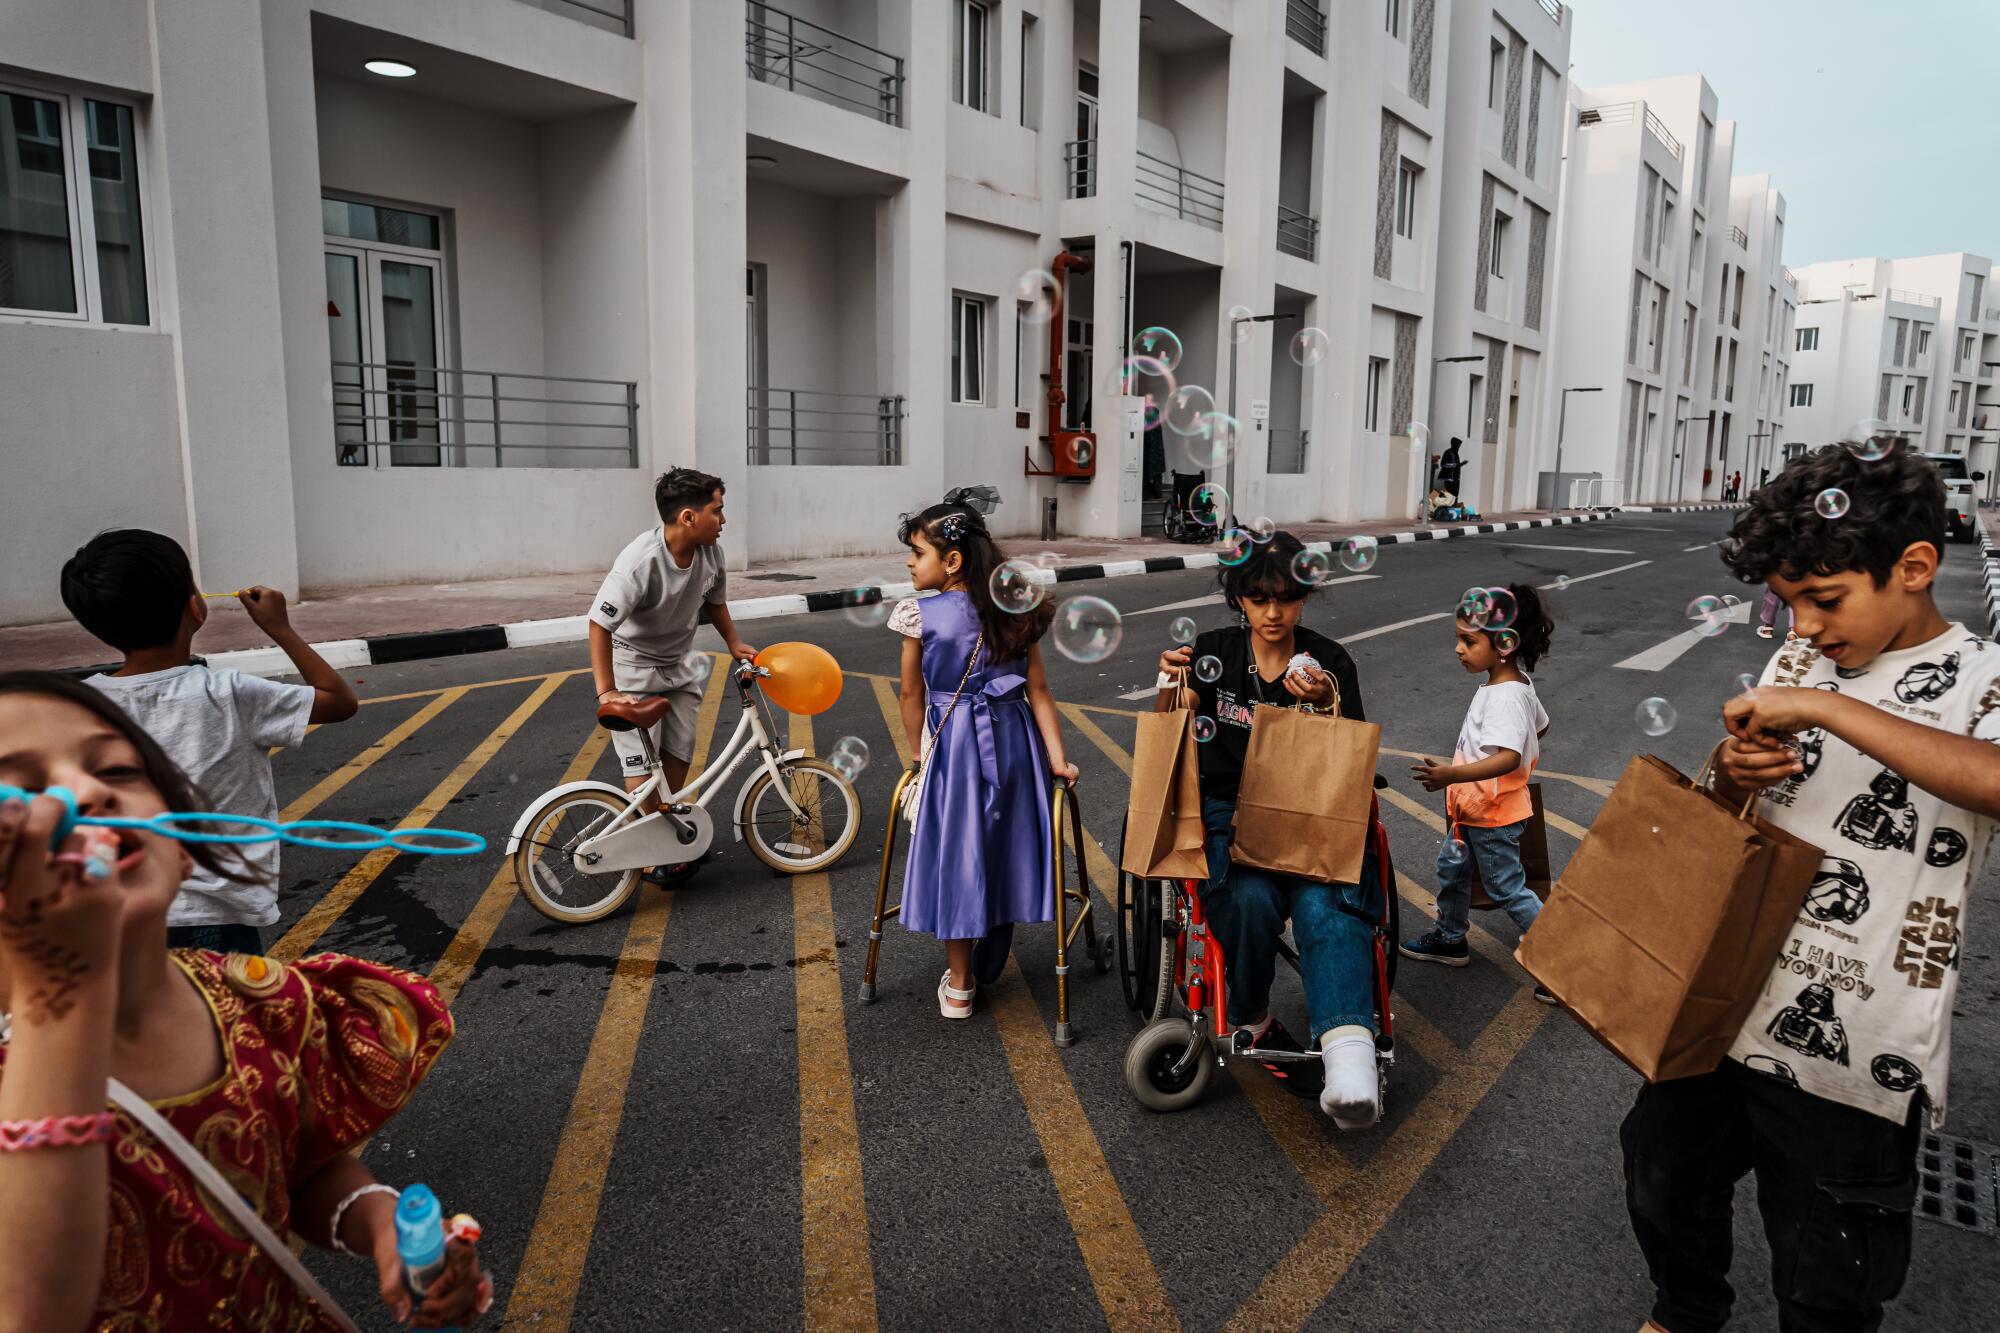 A group of children, including one in a wheelchair, holding bags, play on a street near a multistory building 